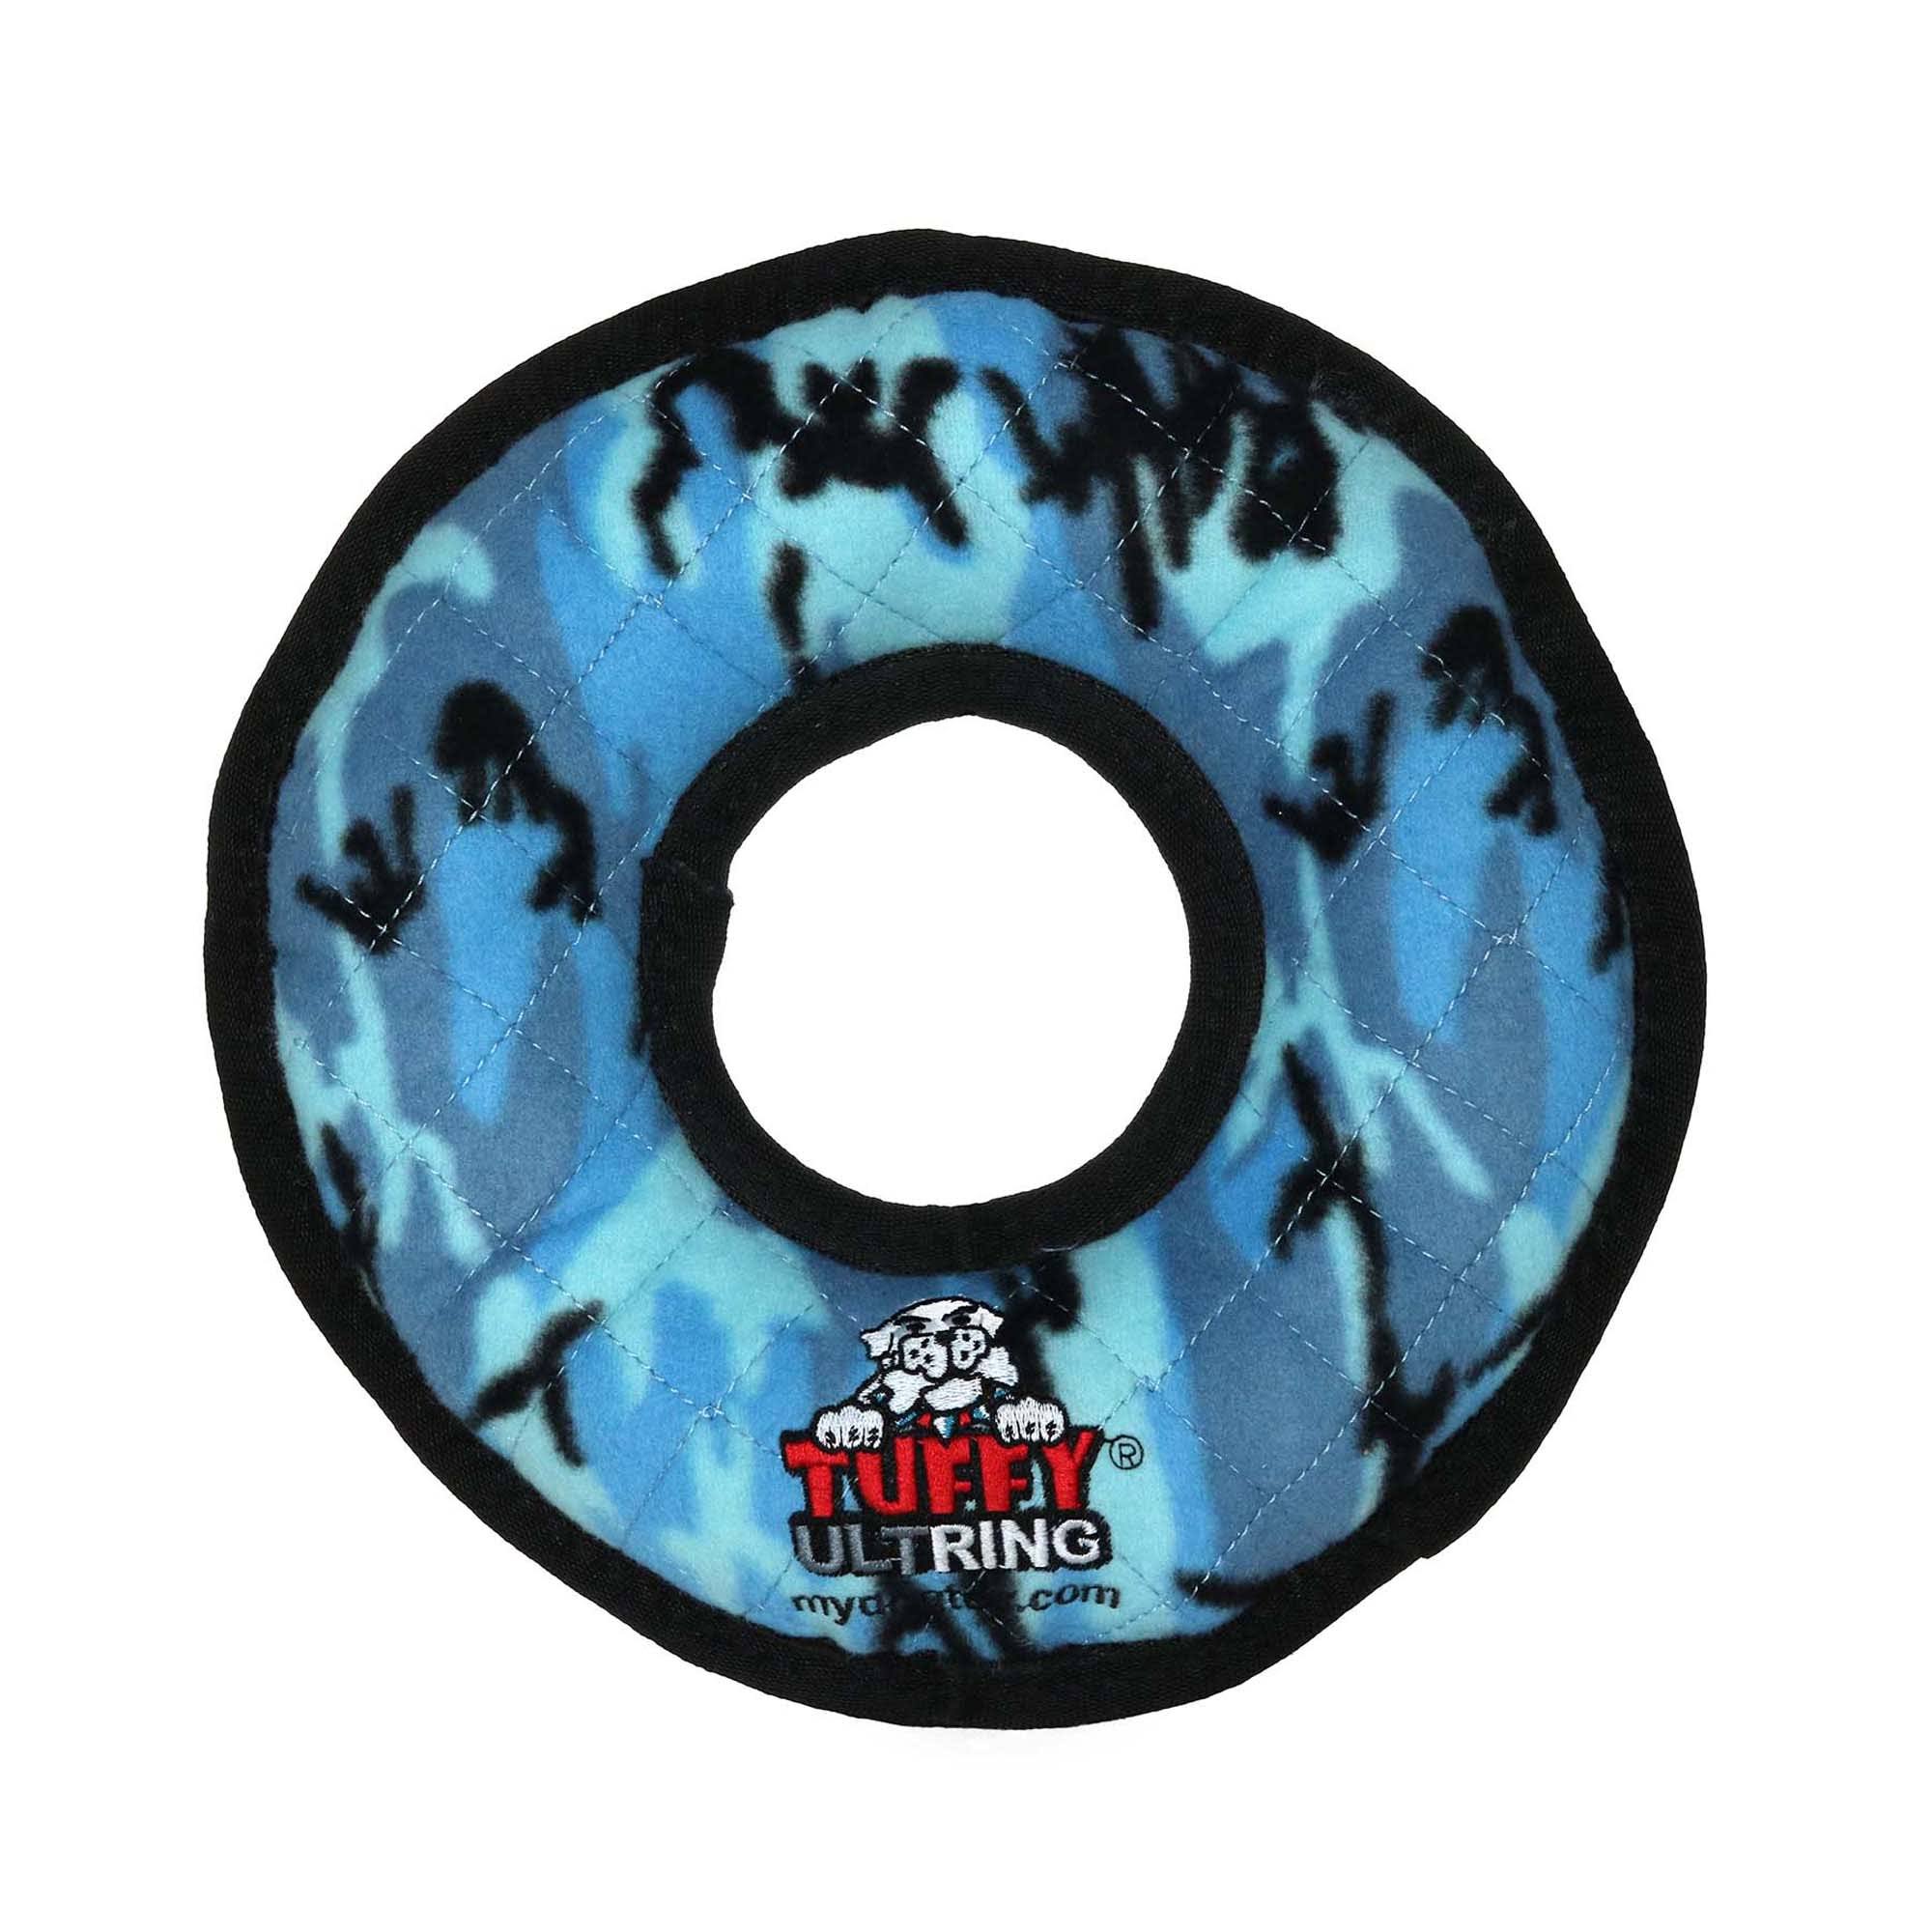 Tuffy's Pet Products Ultimate Ring Dog Toy - Blue Camouflage